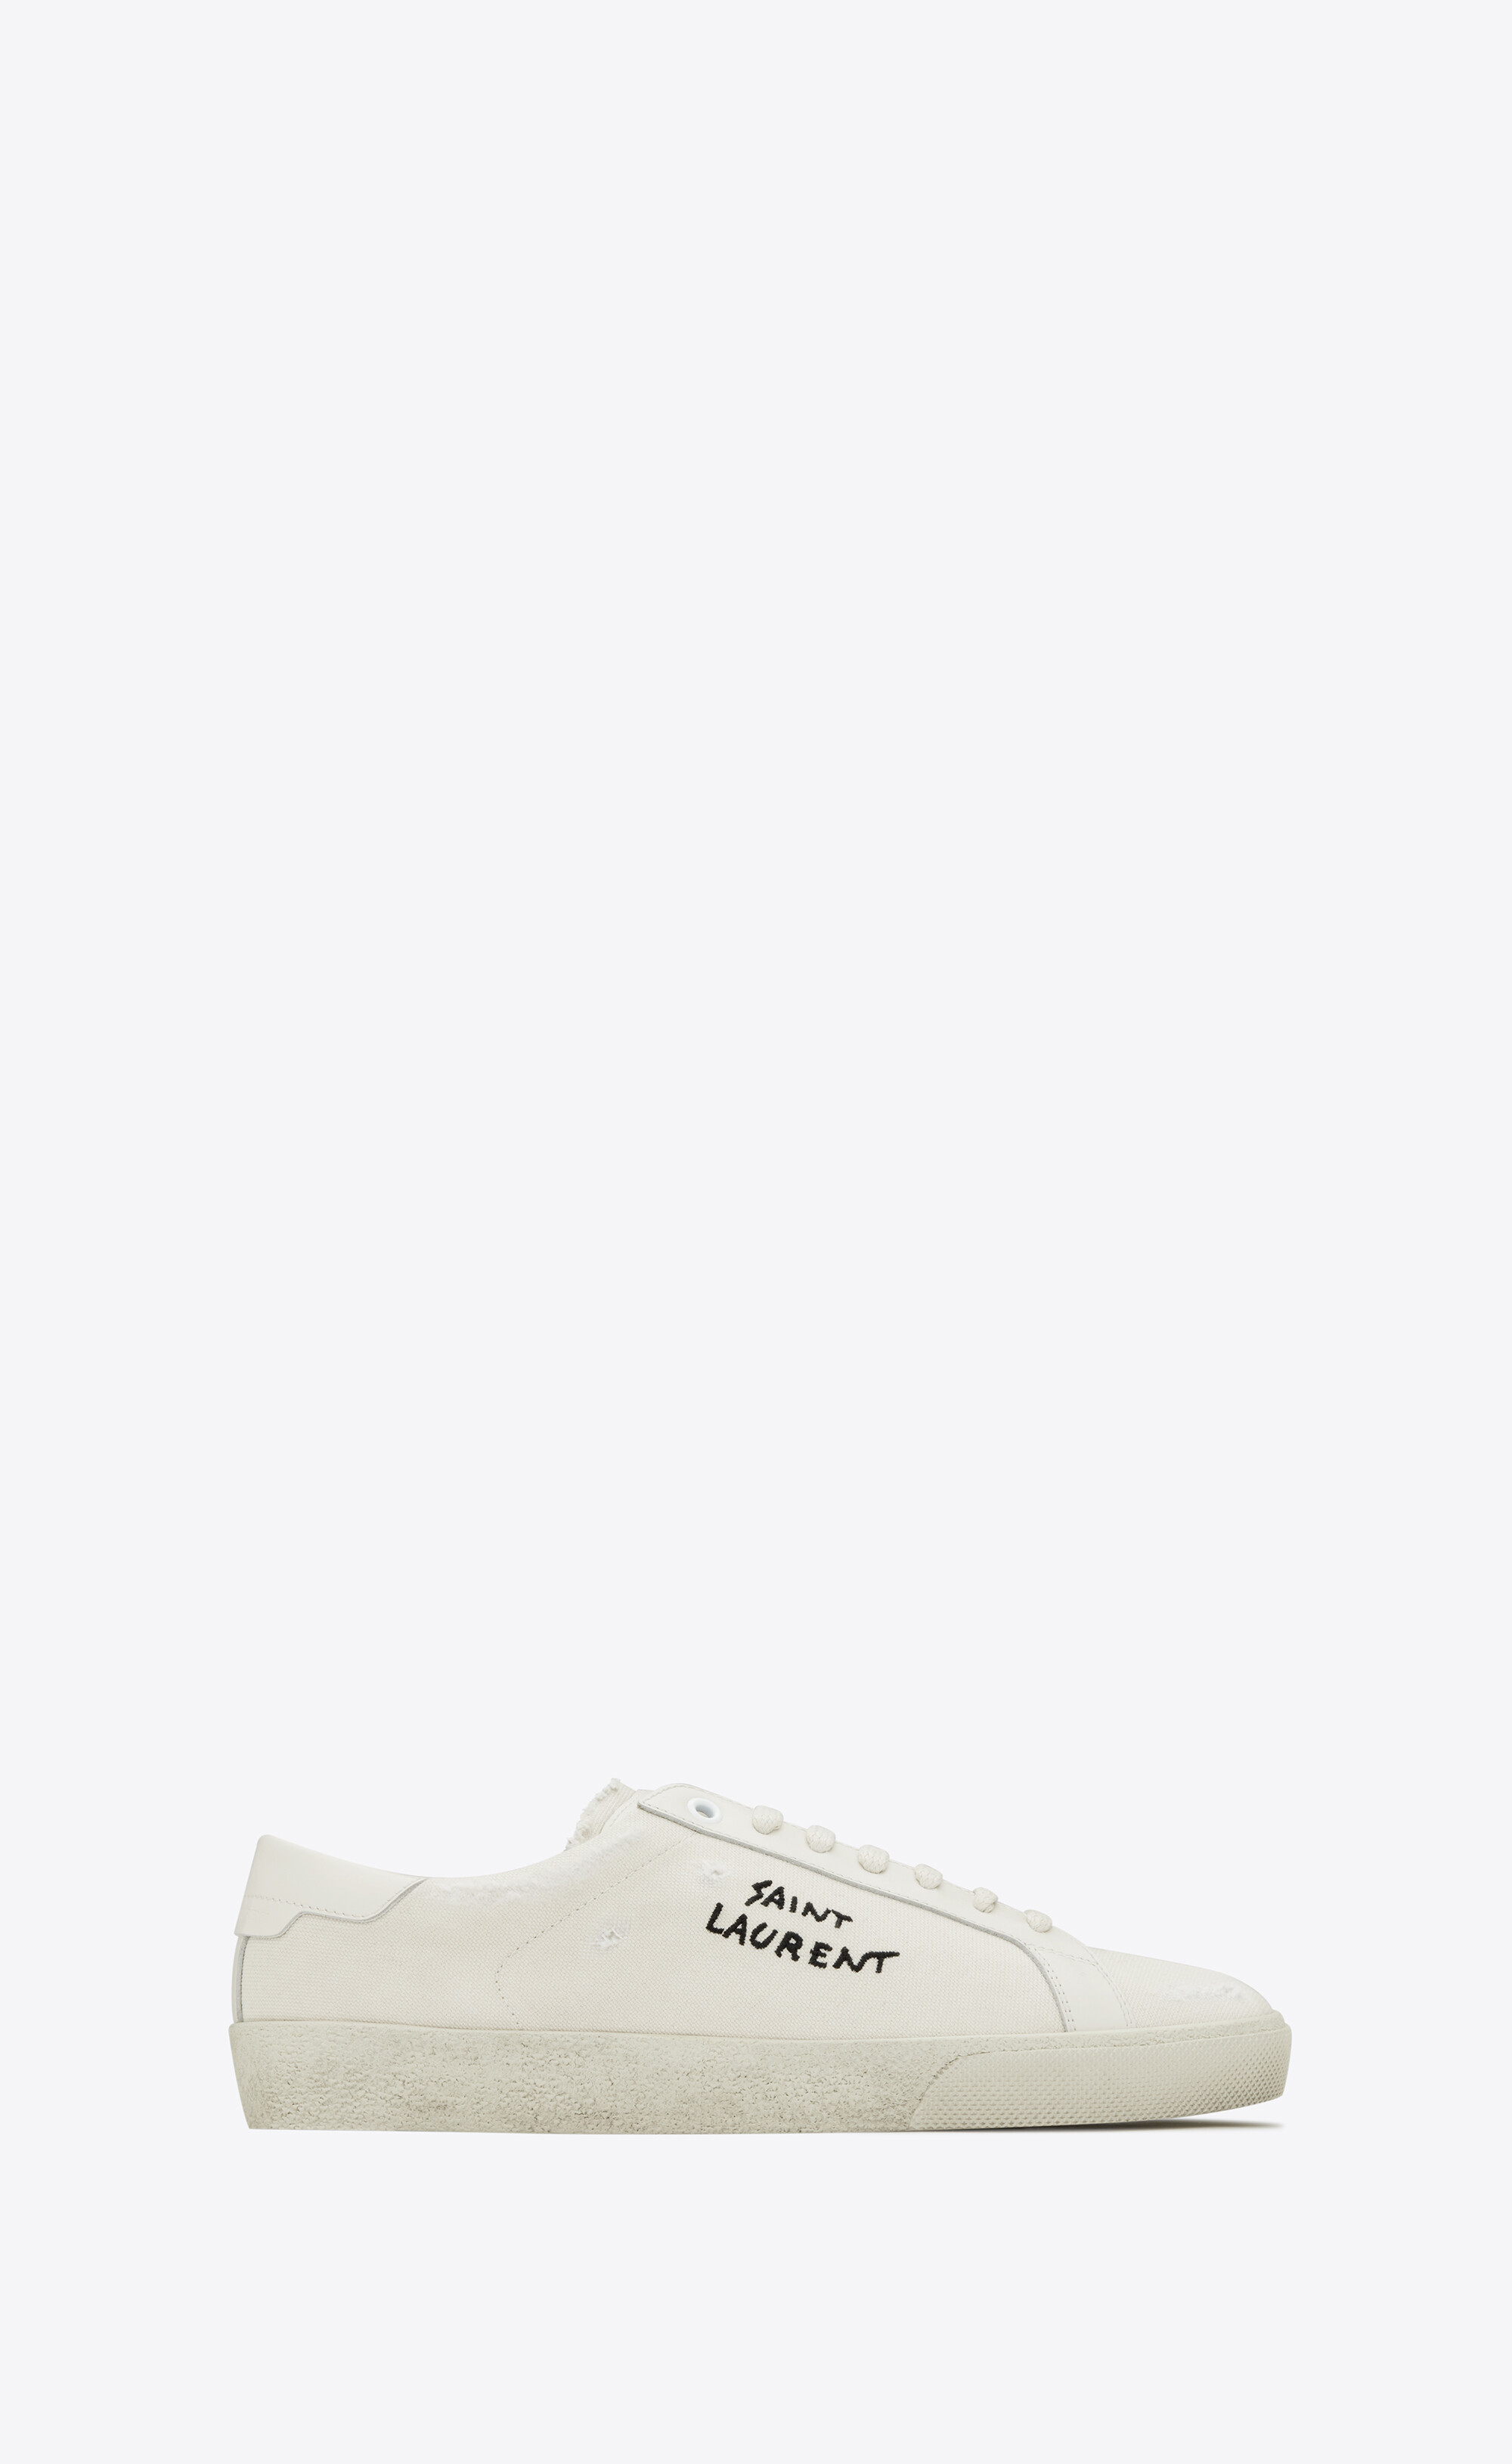 Court sl/06 embroidered sneakers canvas leather | Saint Laurent |